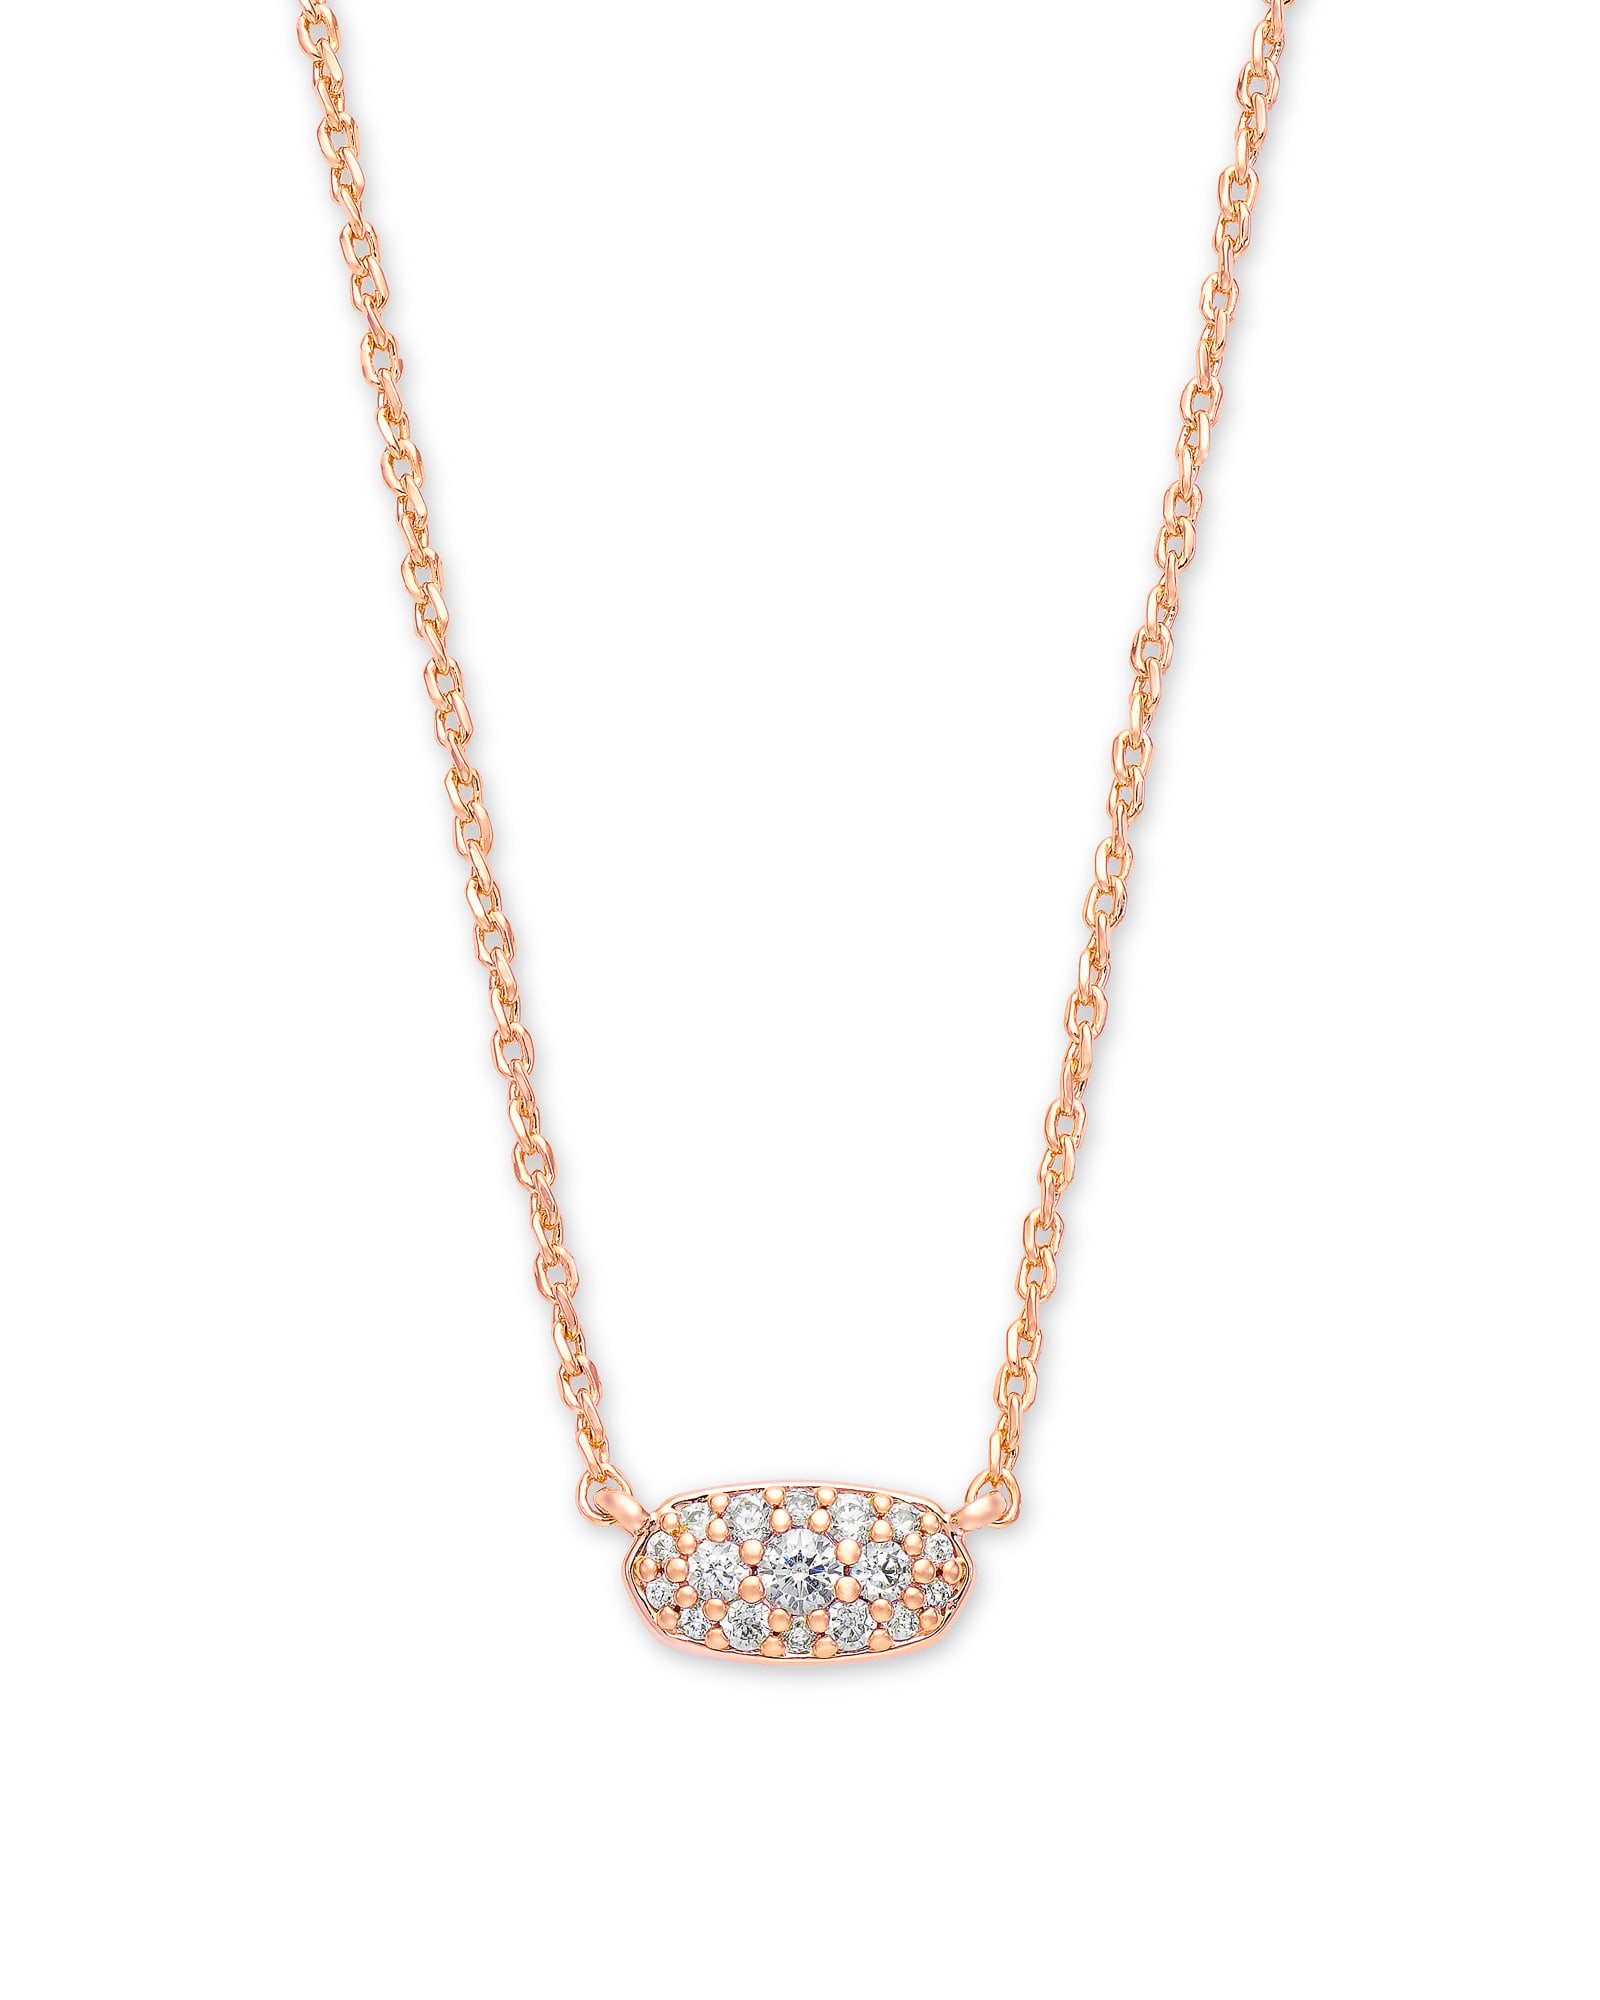 Kendra Scott Grayson Rose Gold Pendant Necklace in White Crystal | Plated Brass/Cubic Zirconia